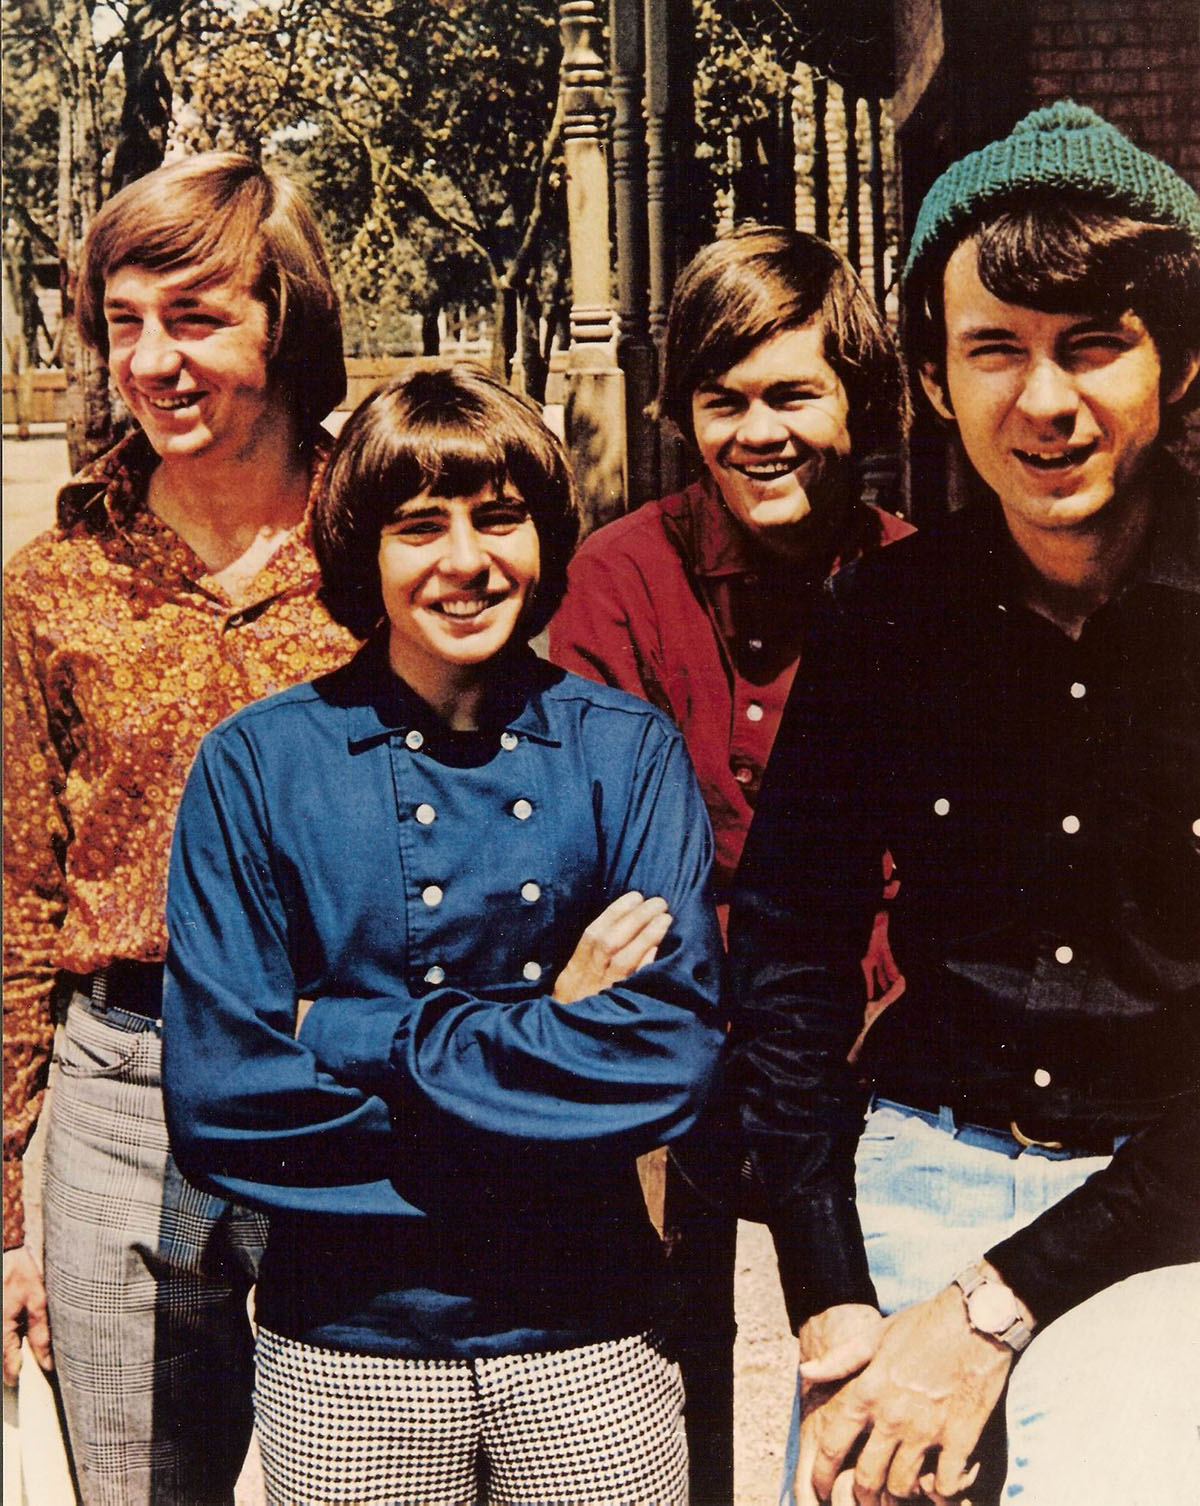 "The Monkees"